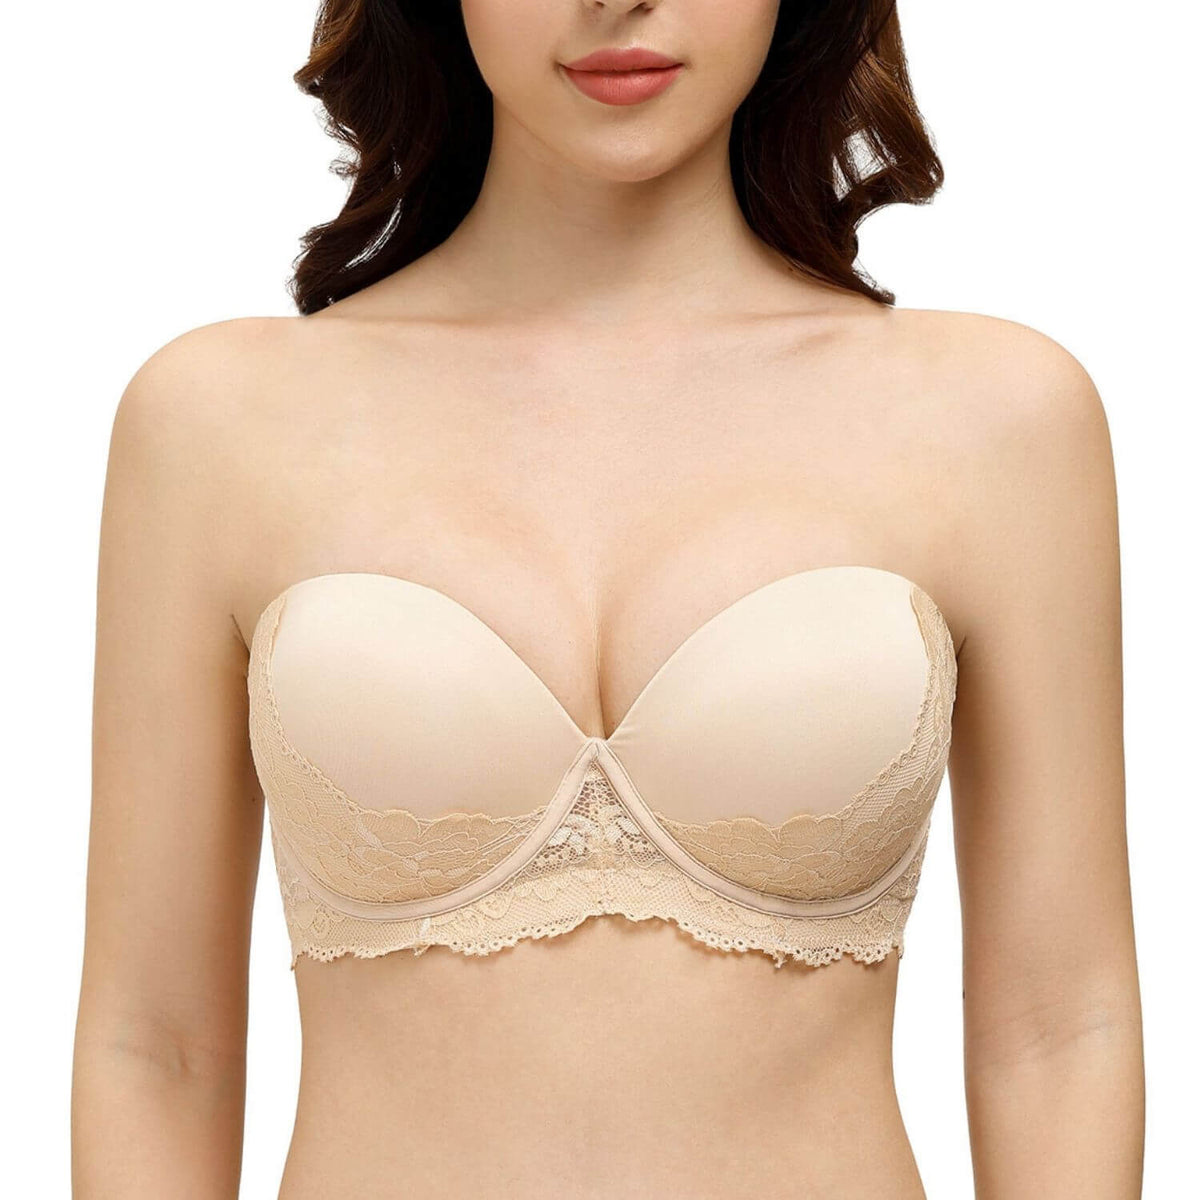 DN Strapless Padded Push Up Bra Invisible Bras Clear Back Straps